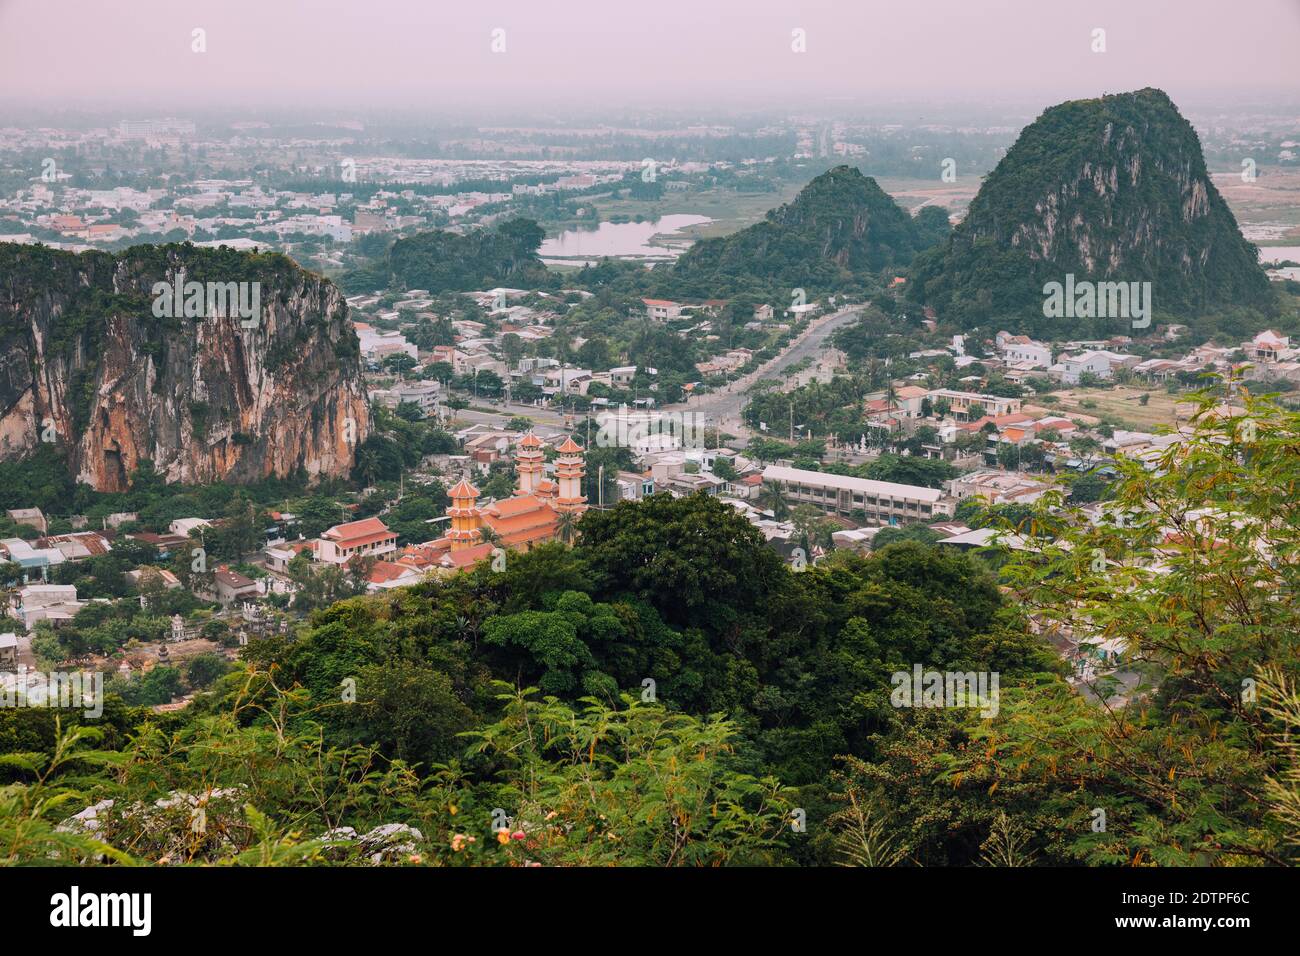 The aerial view from the top of the Marble Mountain, Danang, Vietnam Stock Photo